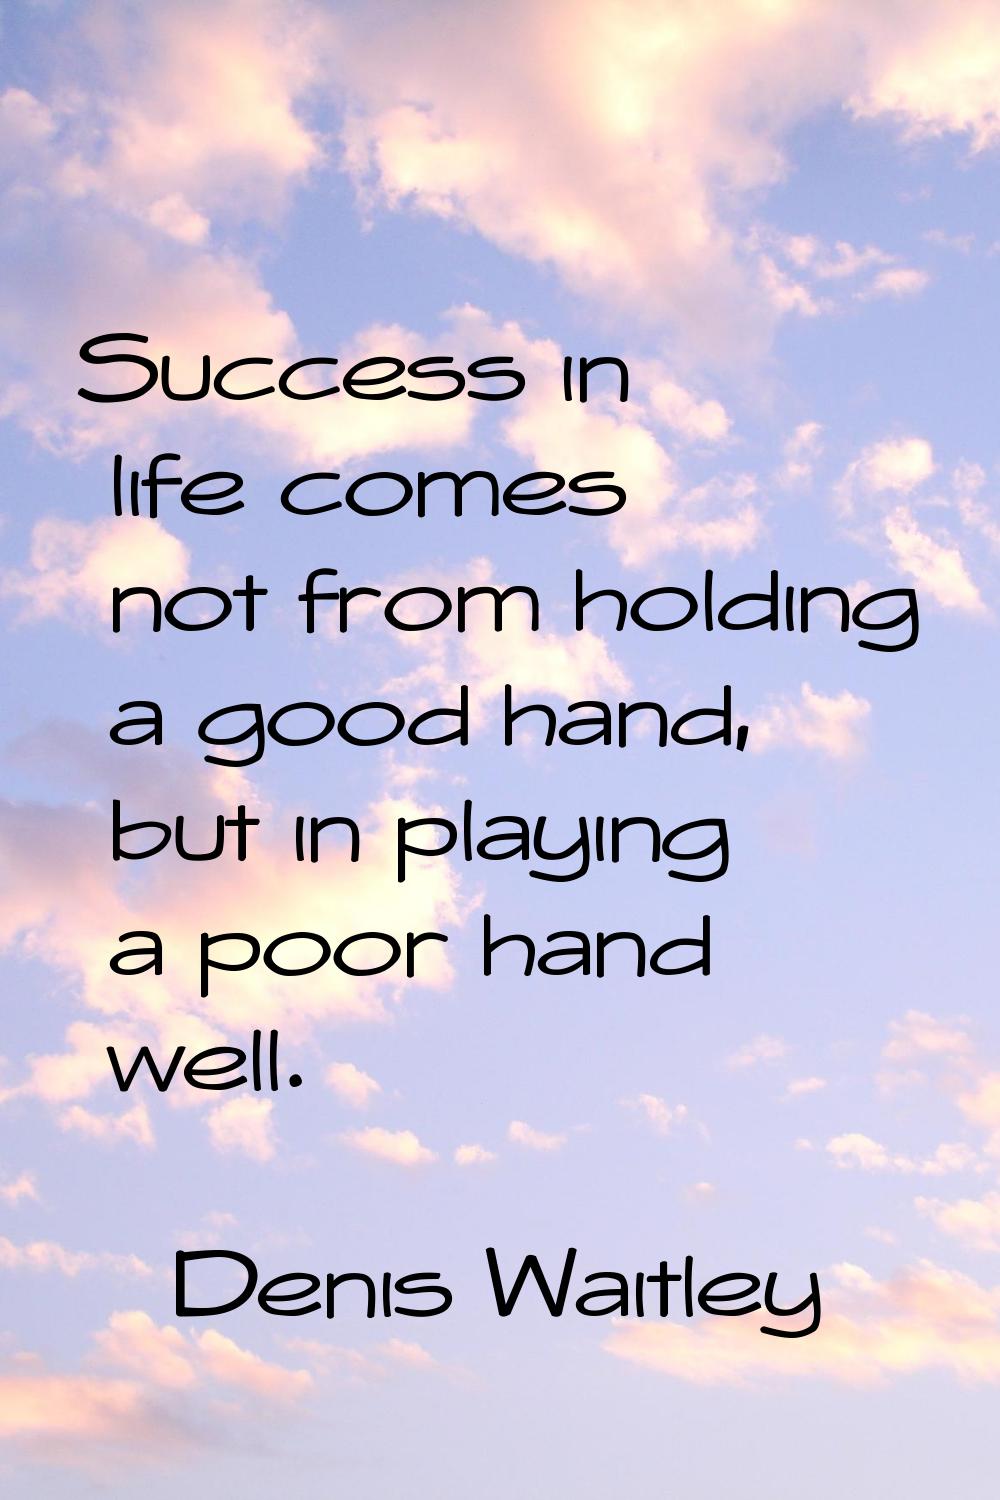 Success in life comes not from holding a good hand, but in playing a poor hand well.